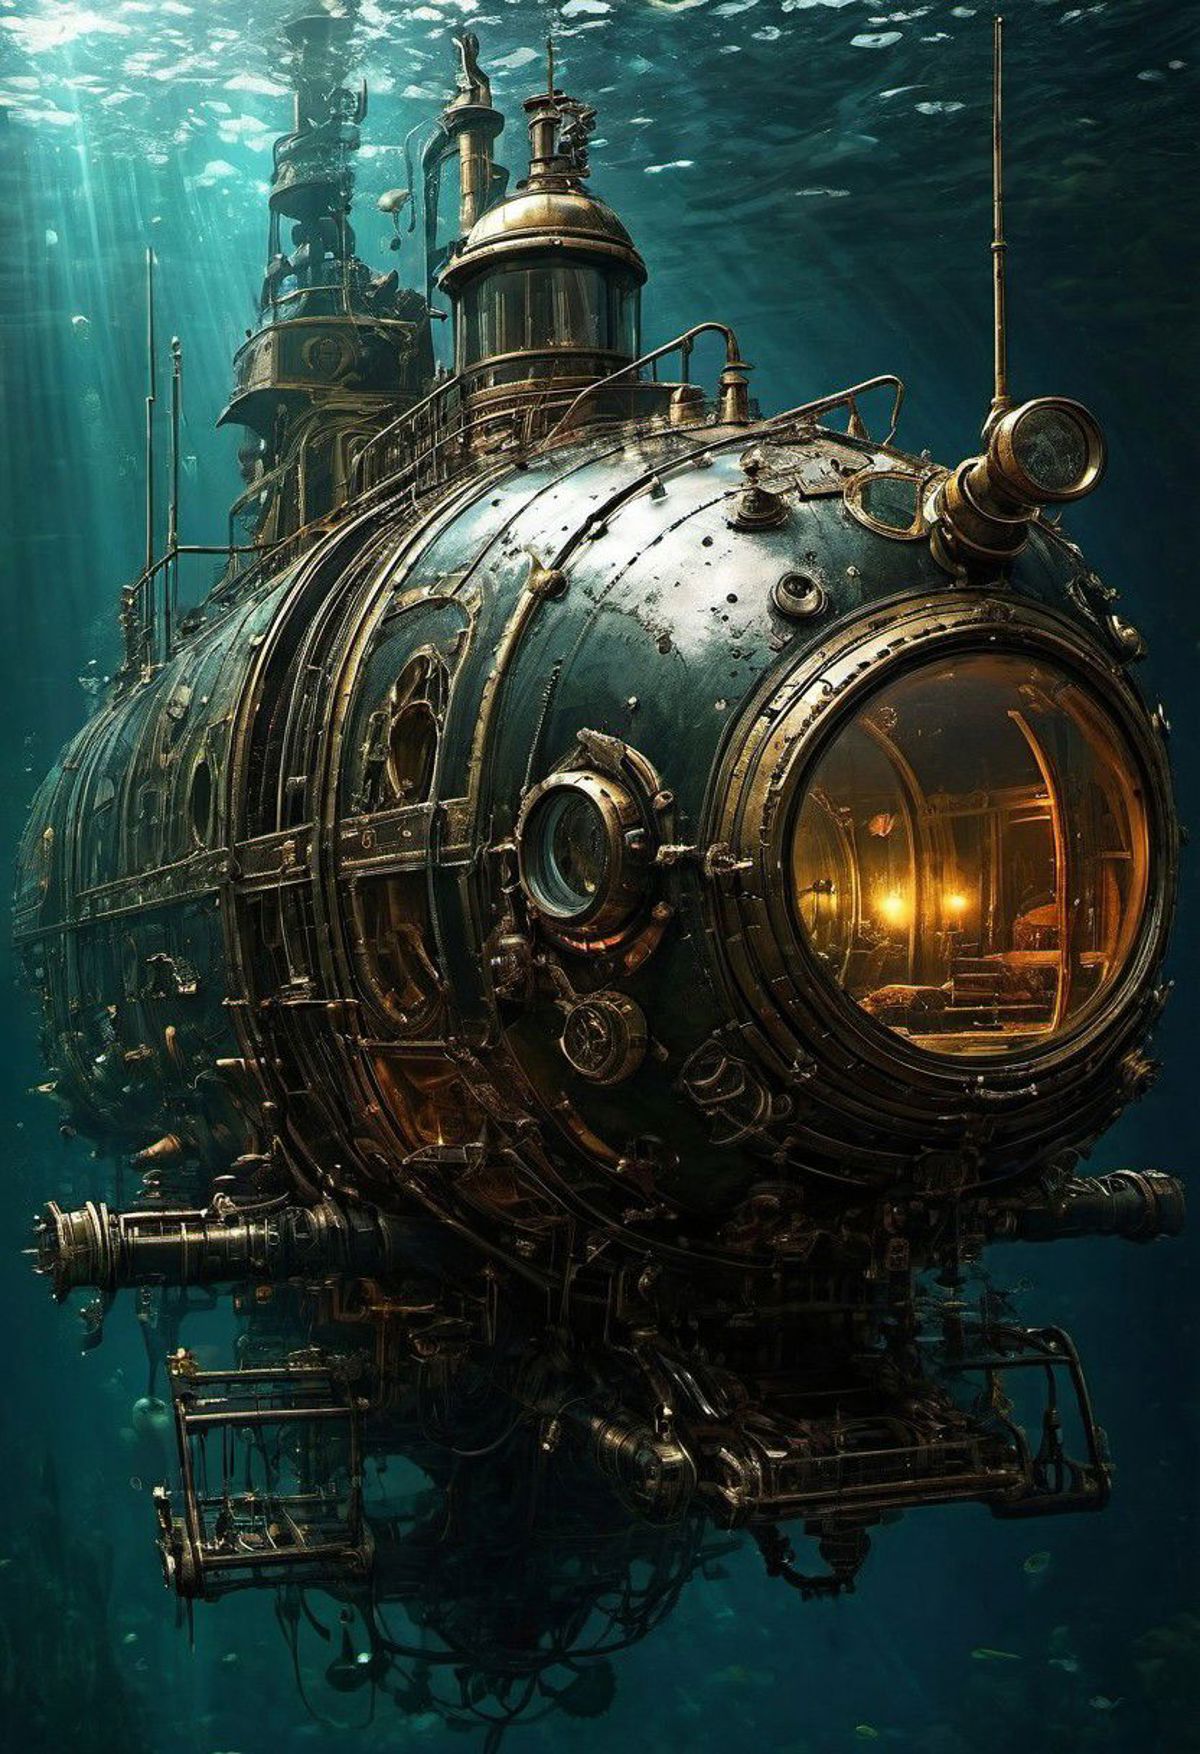 An old submarine with a glass dome, sitting underwater in the ocean.